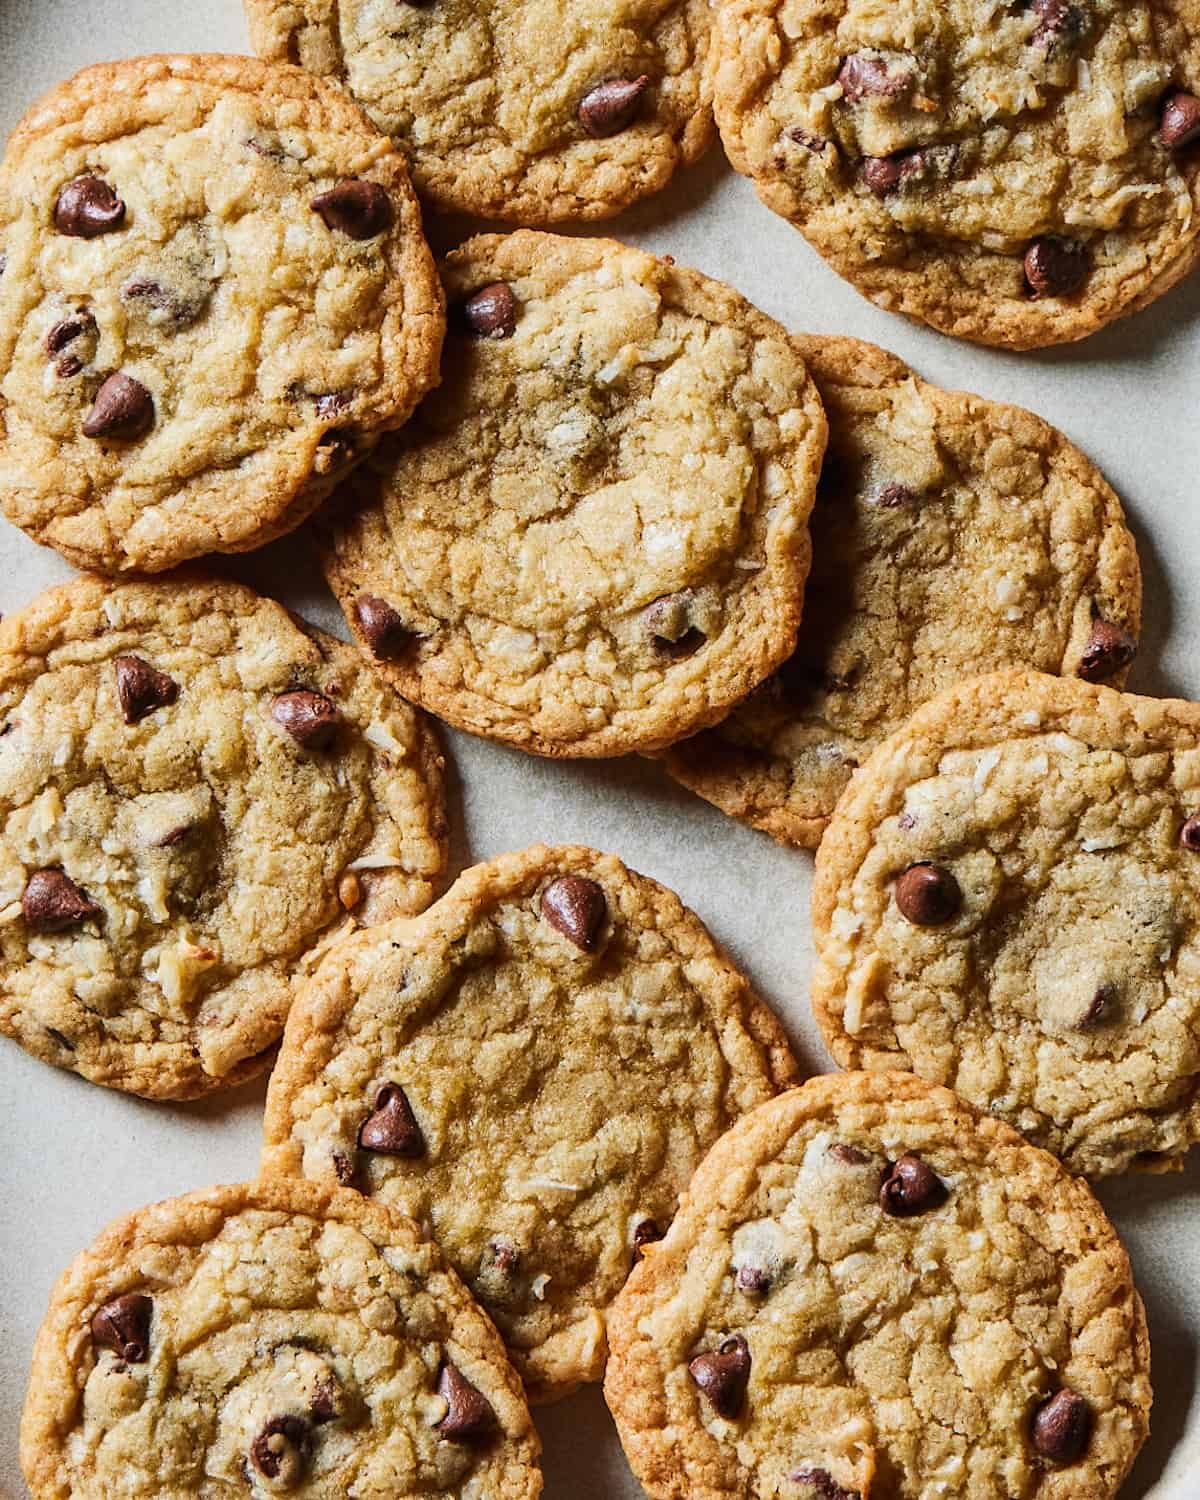 Coconut Chocolate Chip Cookies by www.whatsgabycooking.com (@whatsgabycookin)